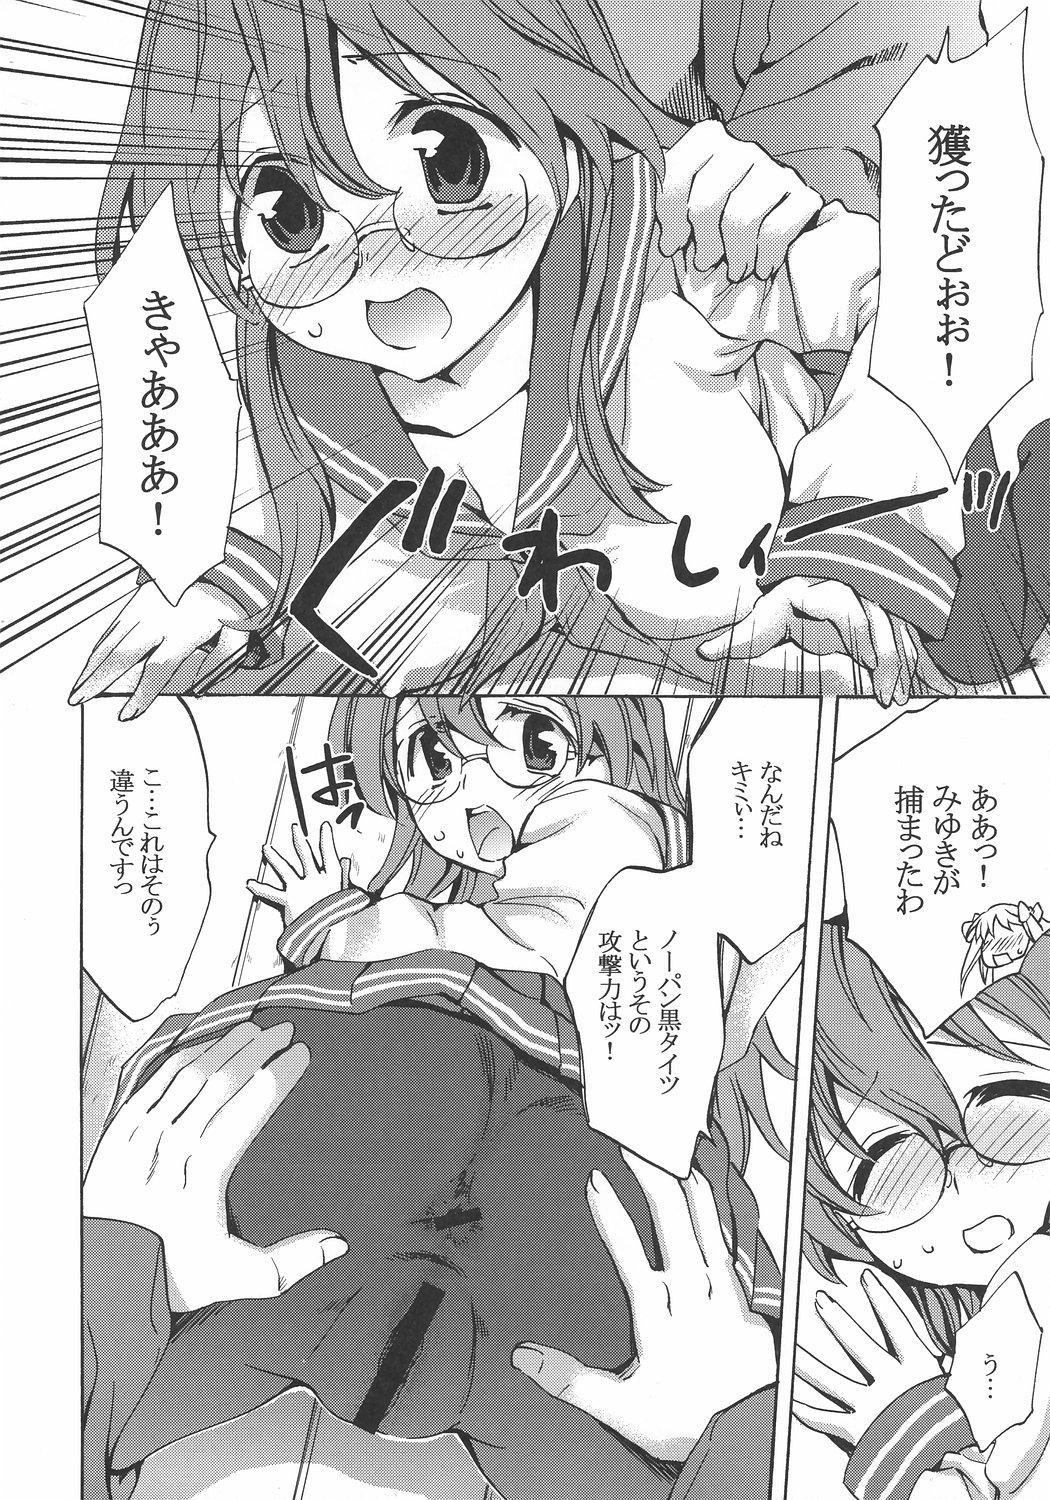 Ass Megane, Megane!! - Lucky star Goth - Page 9